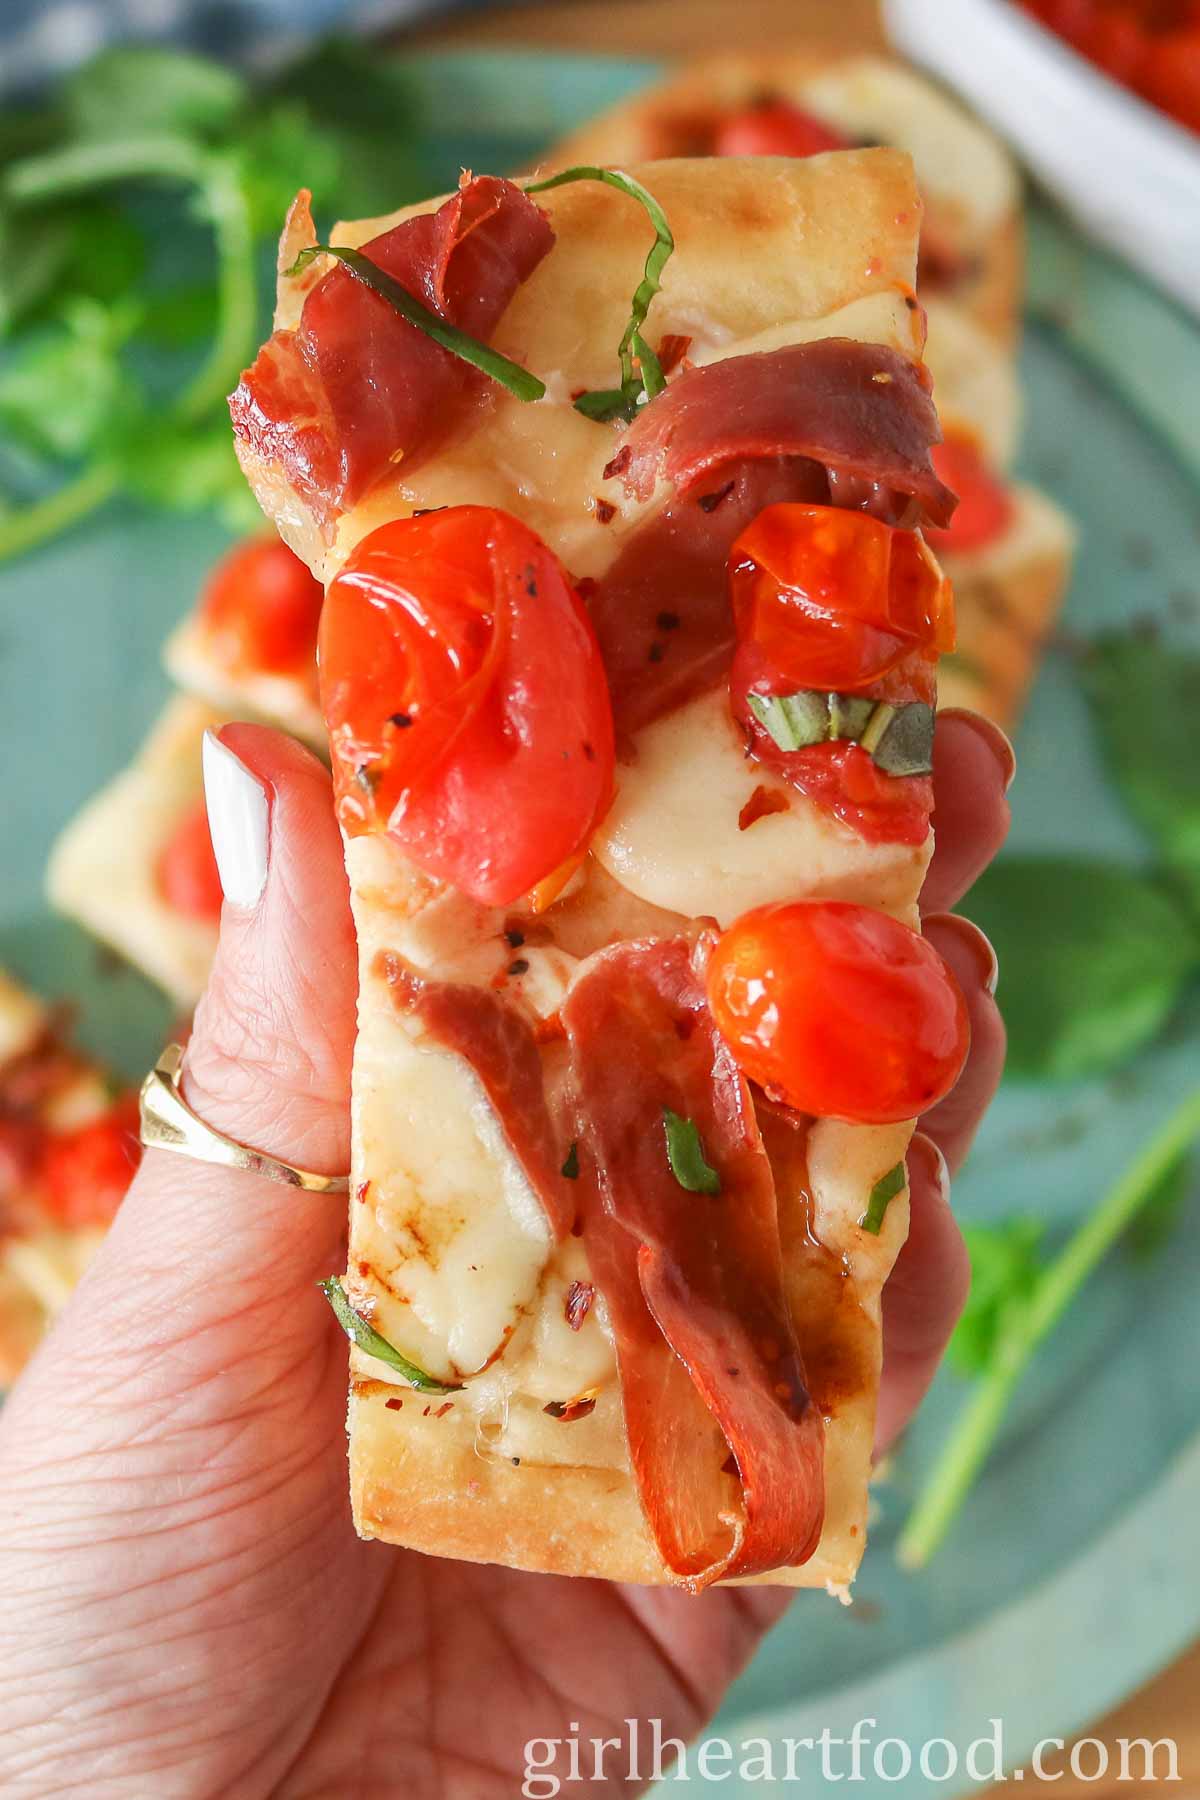 Hand holding a piece of homemade flatbread pizza.